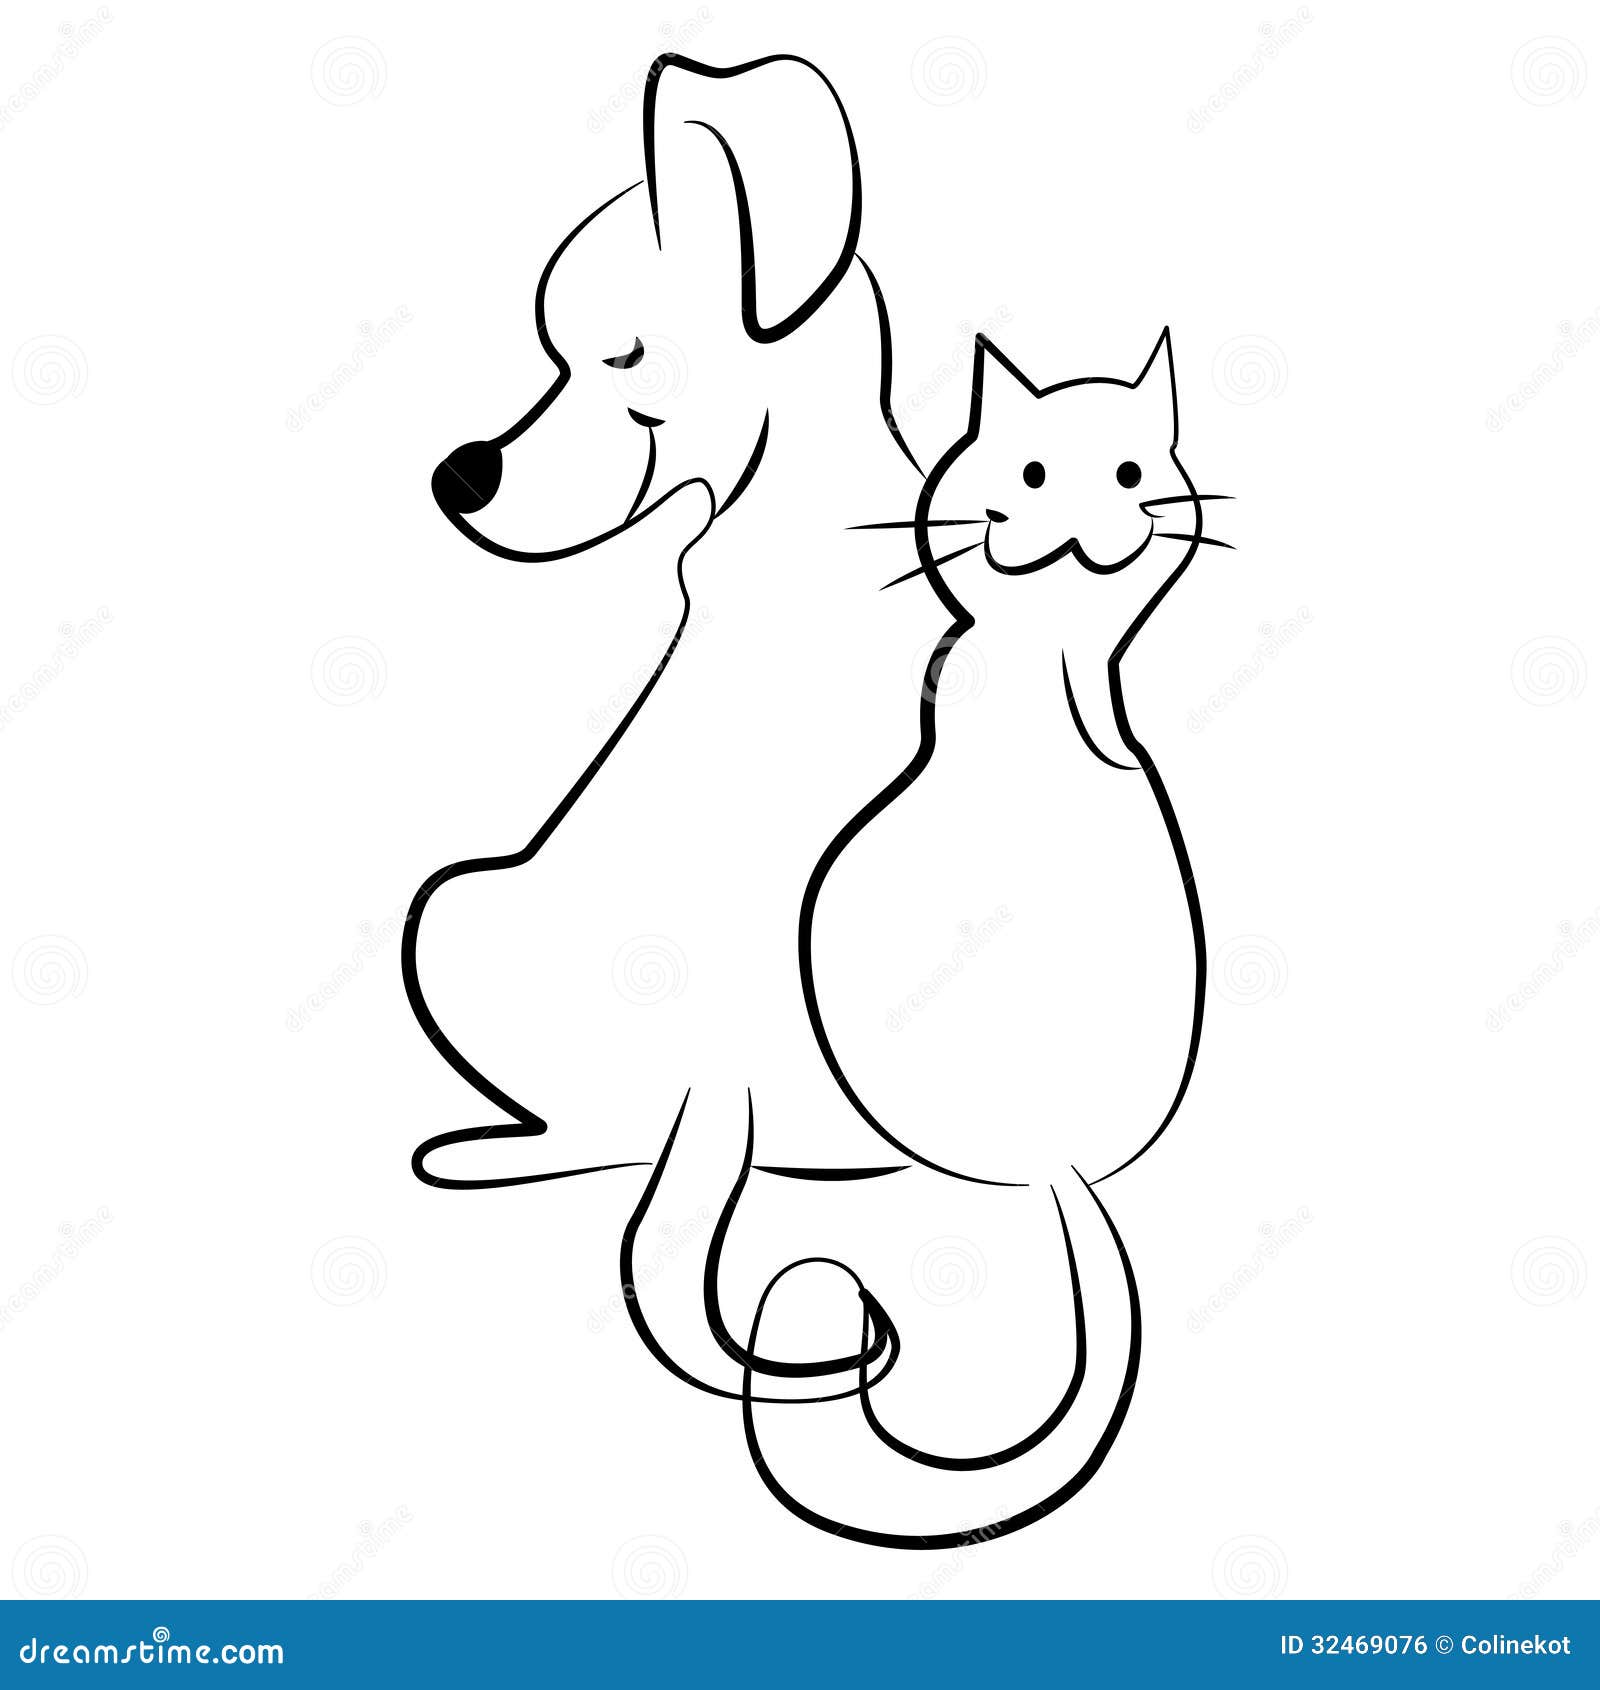 dog and cat clipart black and white - photo #25